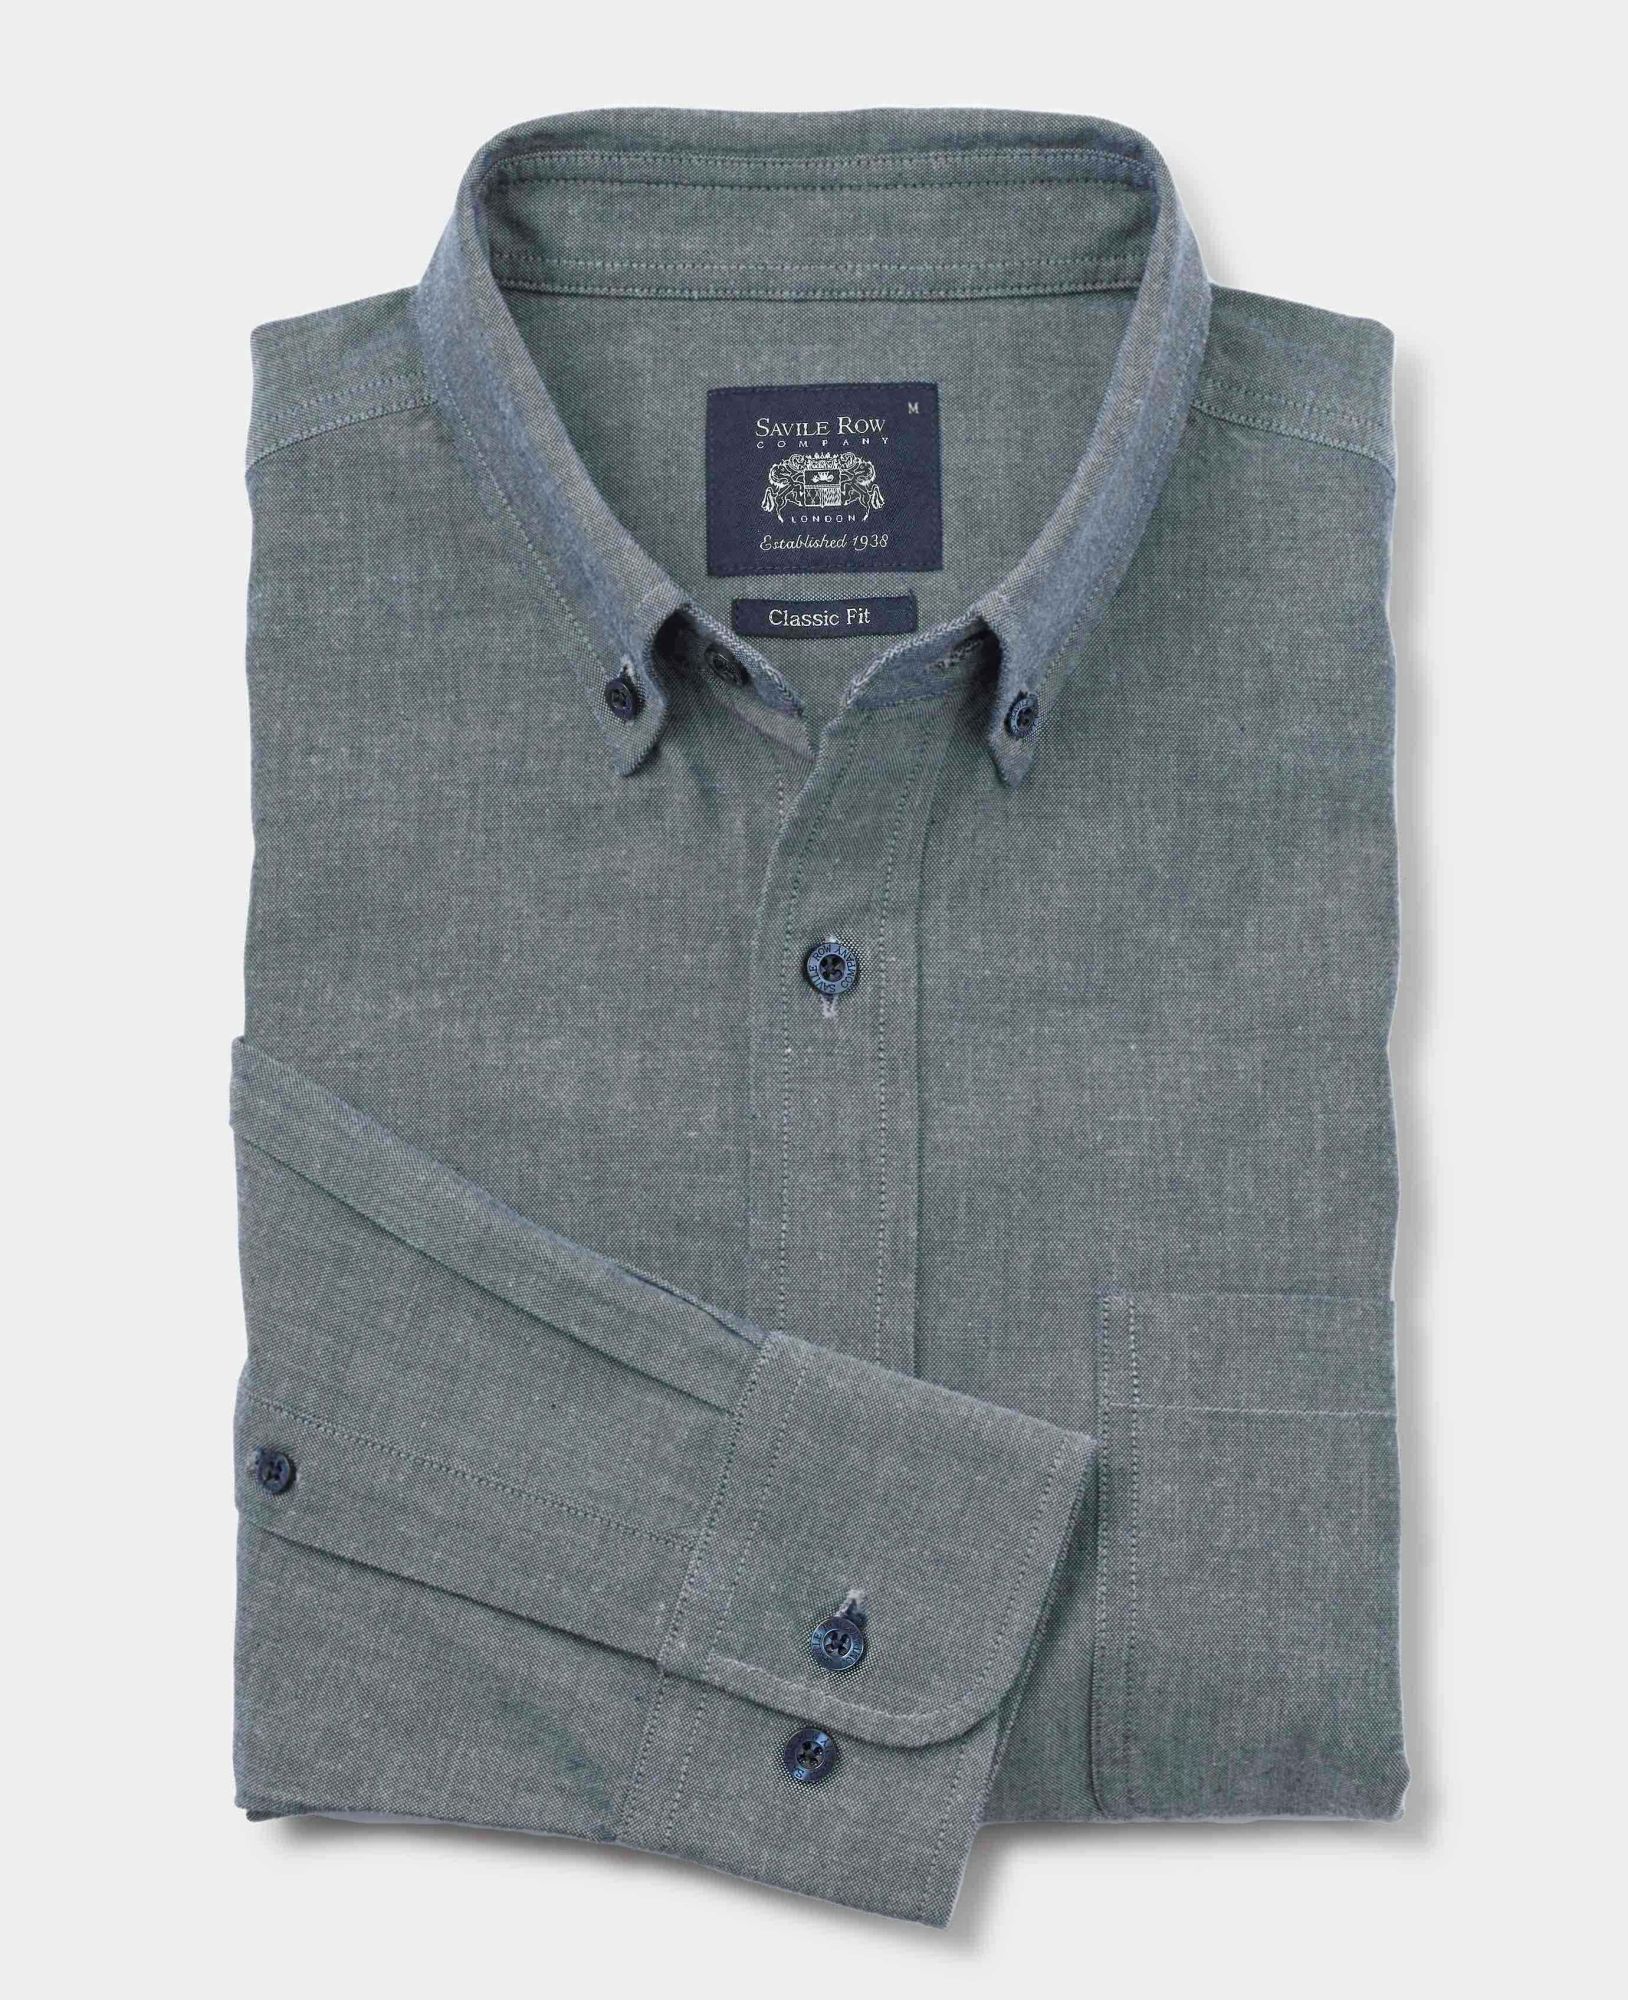 Navy Classic Fit Chambray Oxford Shirt M Lengthen by 2